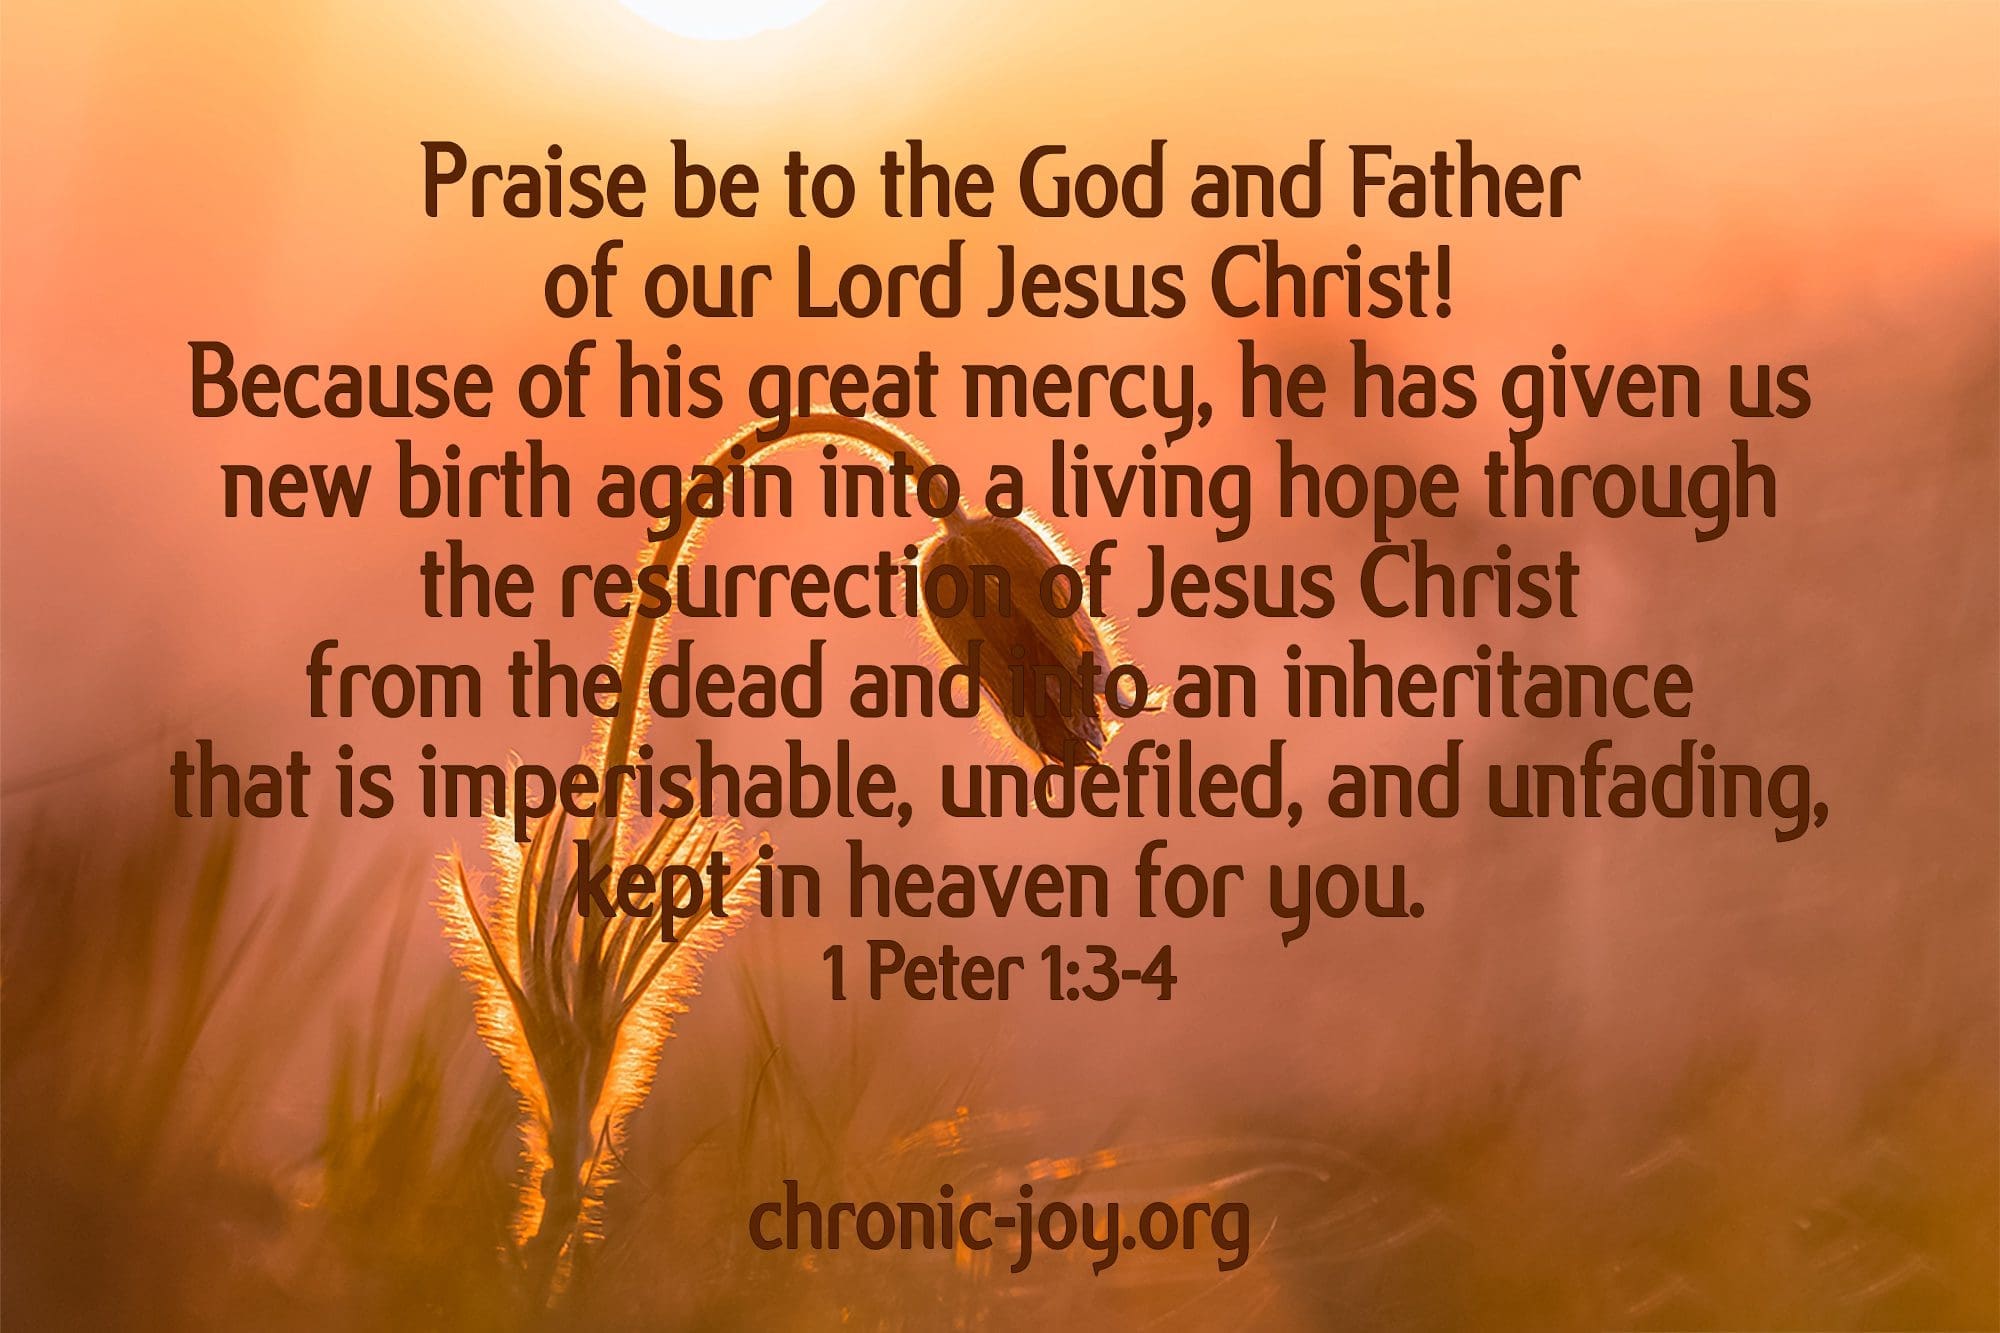 "Praise be to the God and Father of our Lord Jesus Christ! Because of his great mercy, he has given us new birth again into a living hope through the resurrection of Jesus Christ from the dead and into an inheritance that is imperishable, undefiled, and unfading, kept in heaven for you." 1 Peter 1:3-4